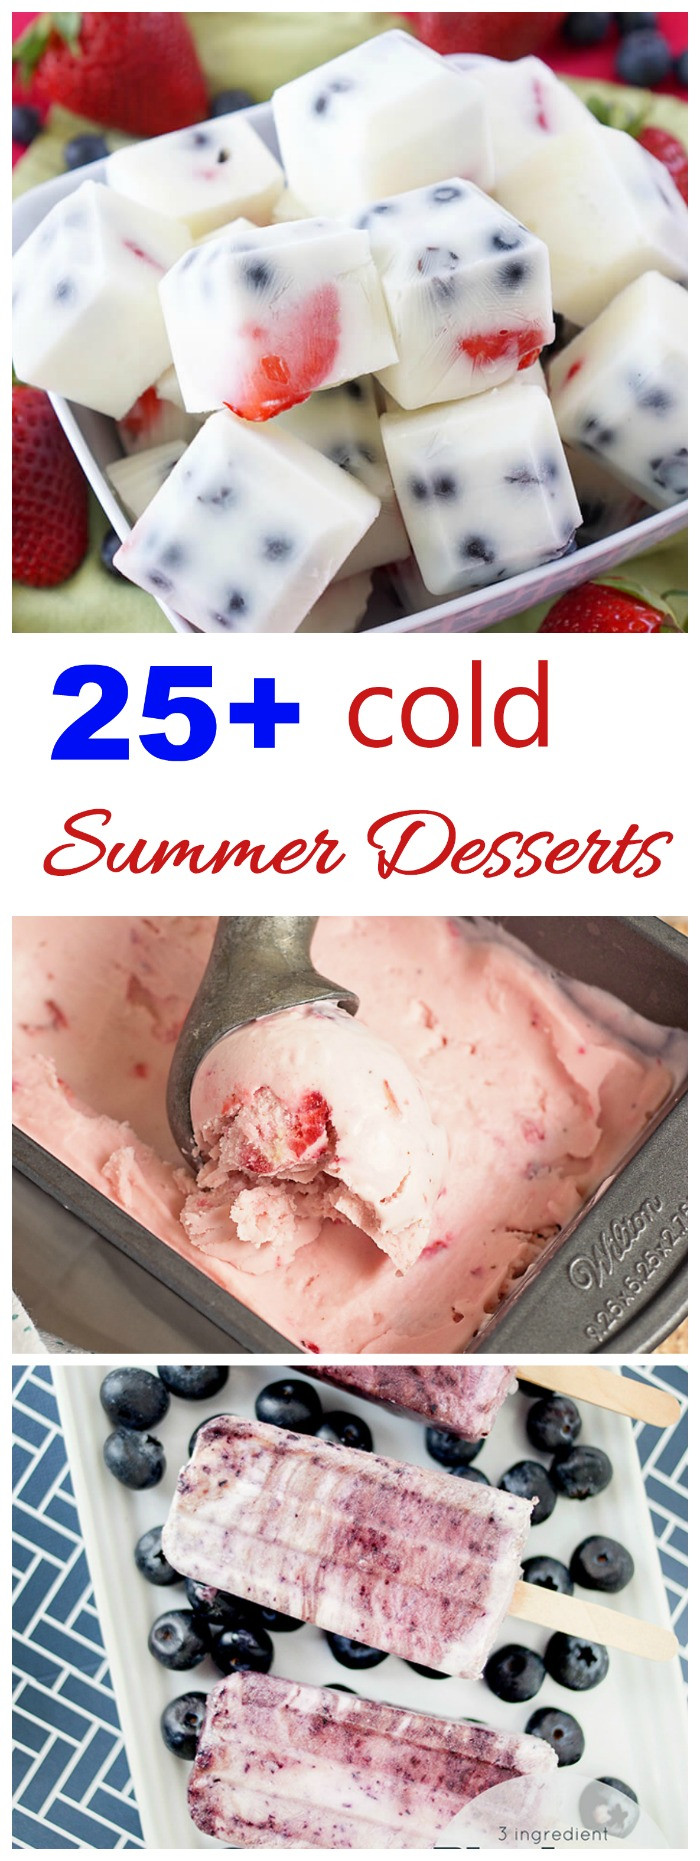 Cold Summer Desserts
 Cold Summer Desserts to Beat the Heat The Gardening Cook